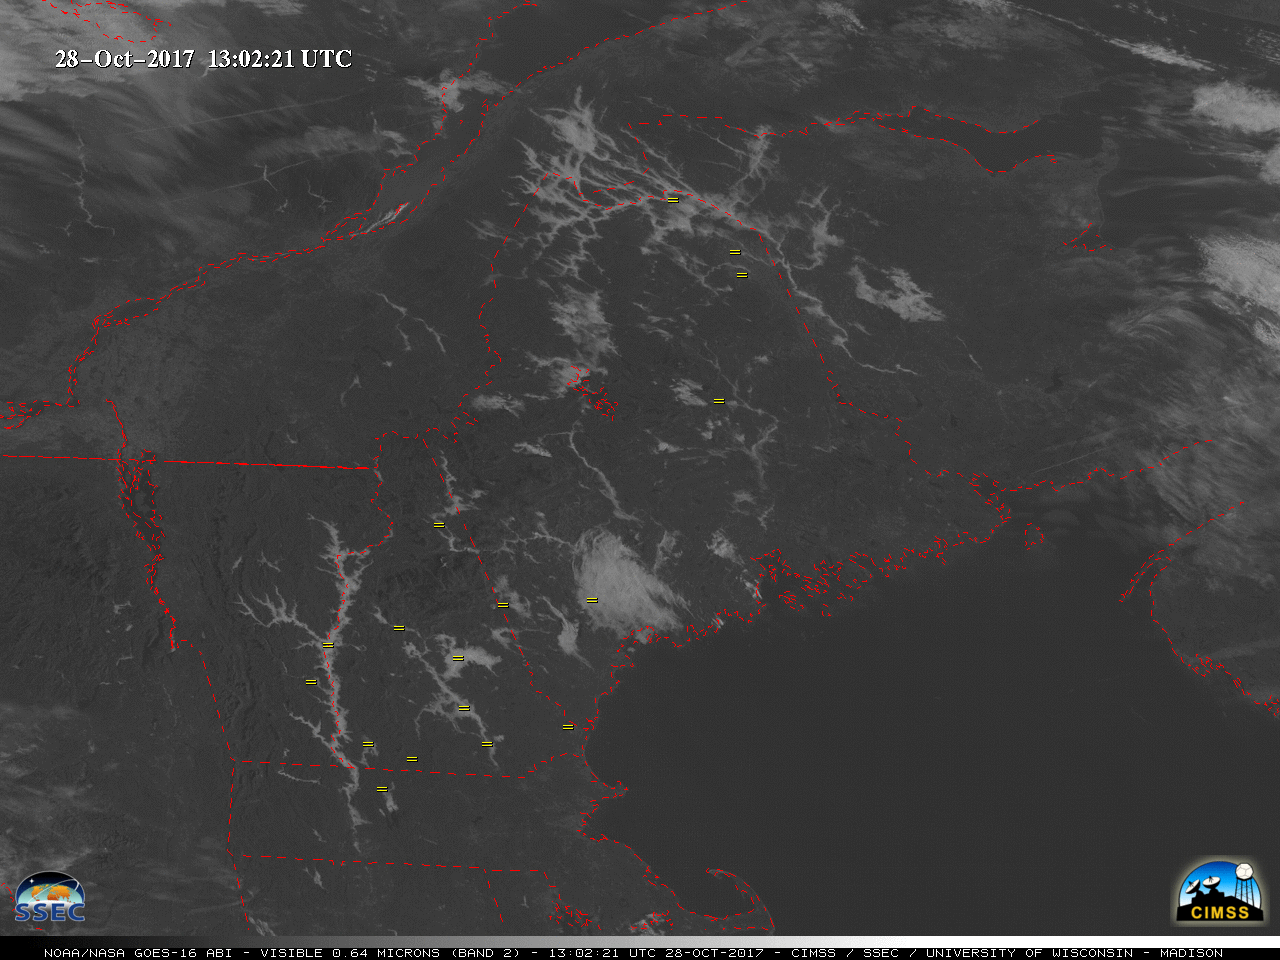 GOES-16 Visible (0.64 µm) images, with hourly surface reports of fog plotted in yellow [click to play animation]